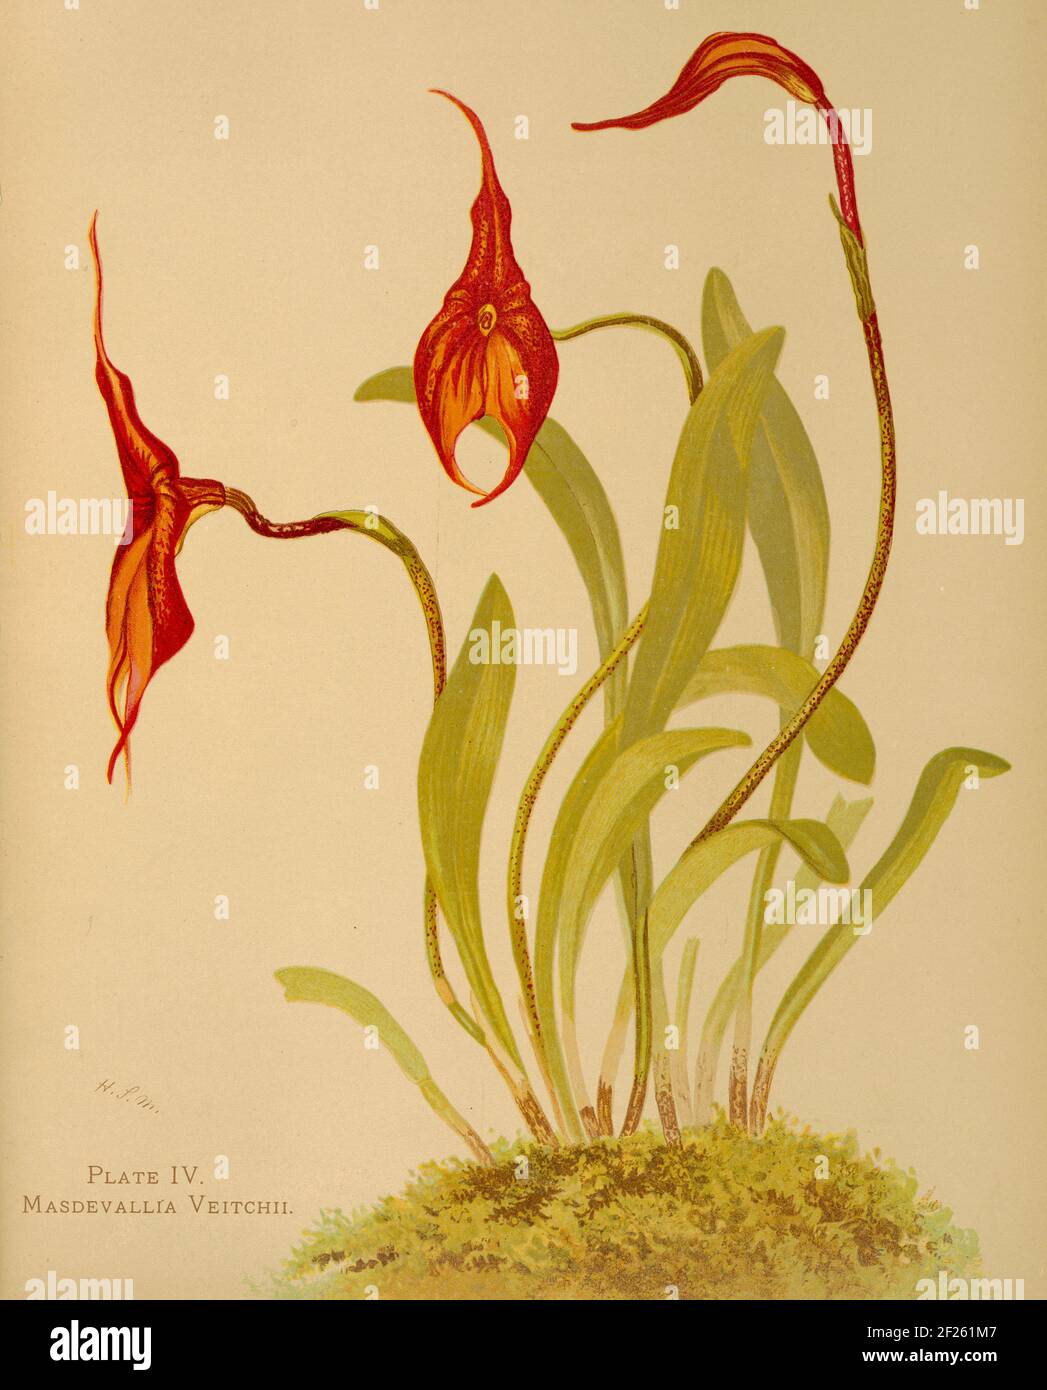 Harriet Stewart Miner's botanical illustration from Orchids - The Royal Family of Plants from 1885 - Masdevallia veitchii Stock Photo